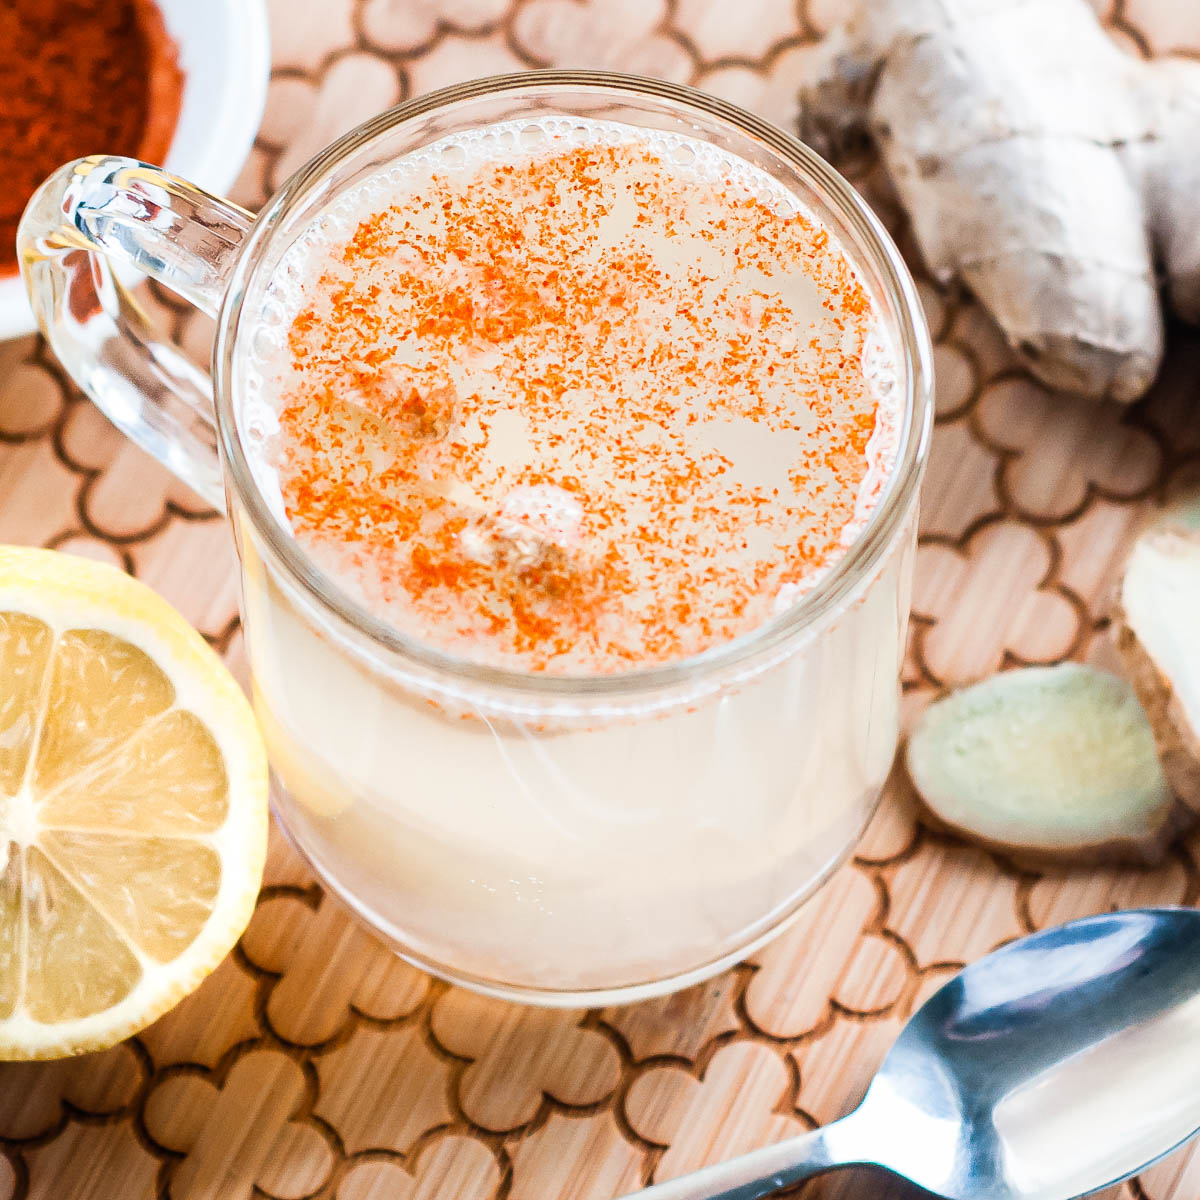 white cloudy liquid in a glass mug sprinkled with cayenne pepper with a spoon and ginger root.